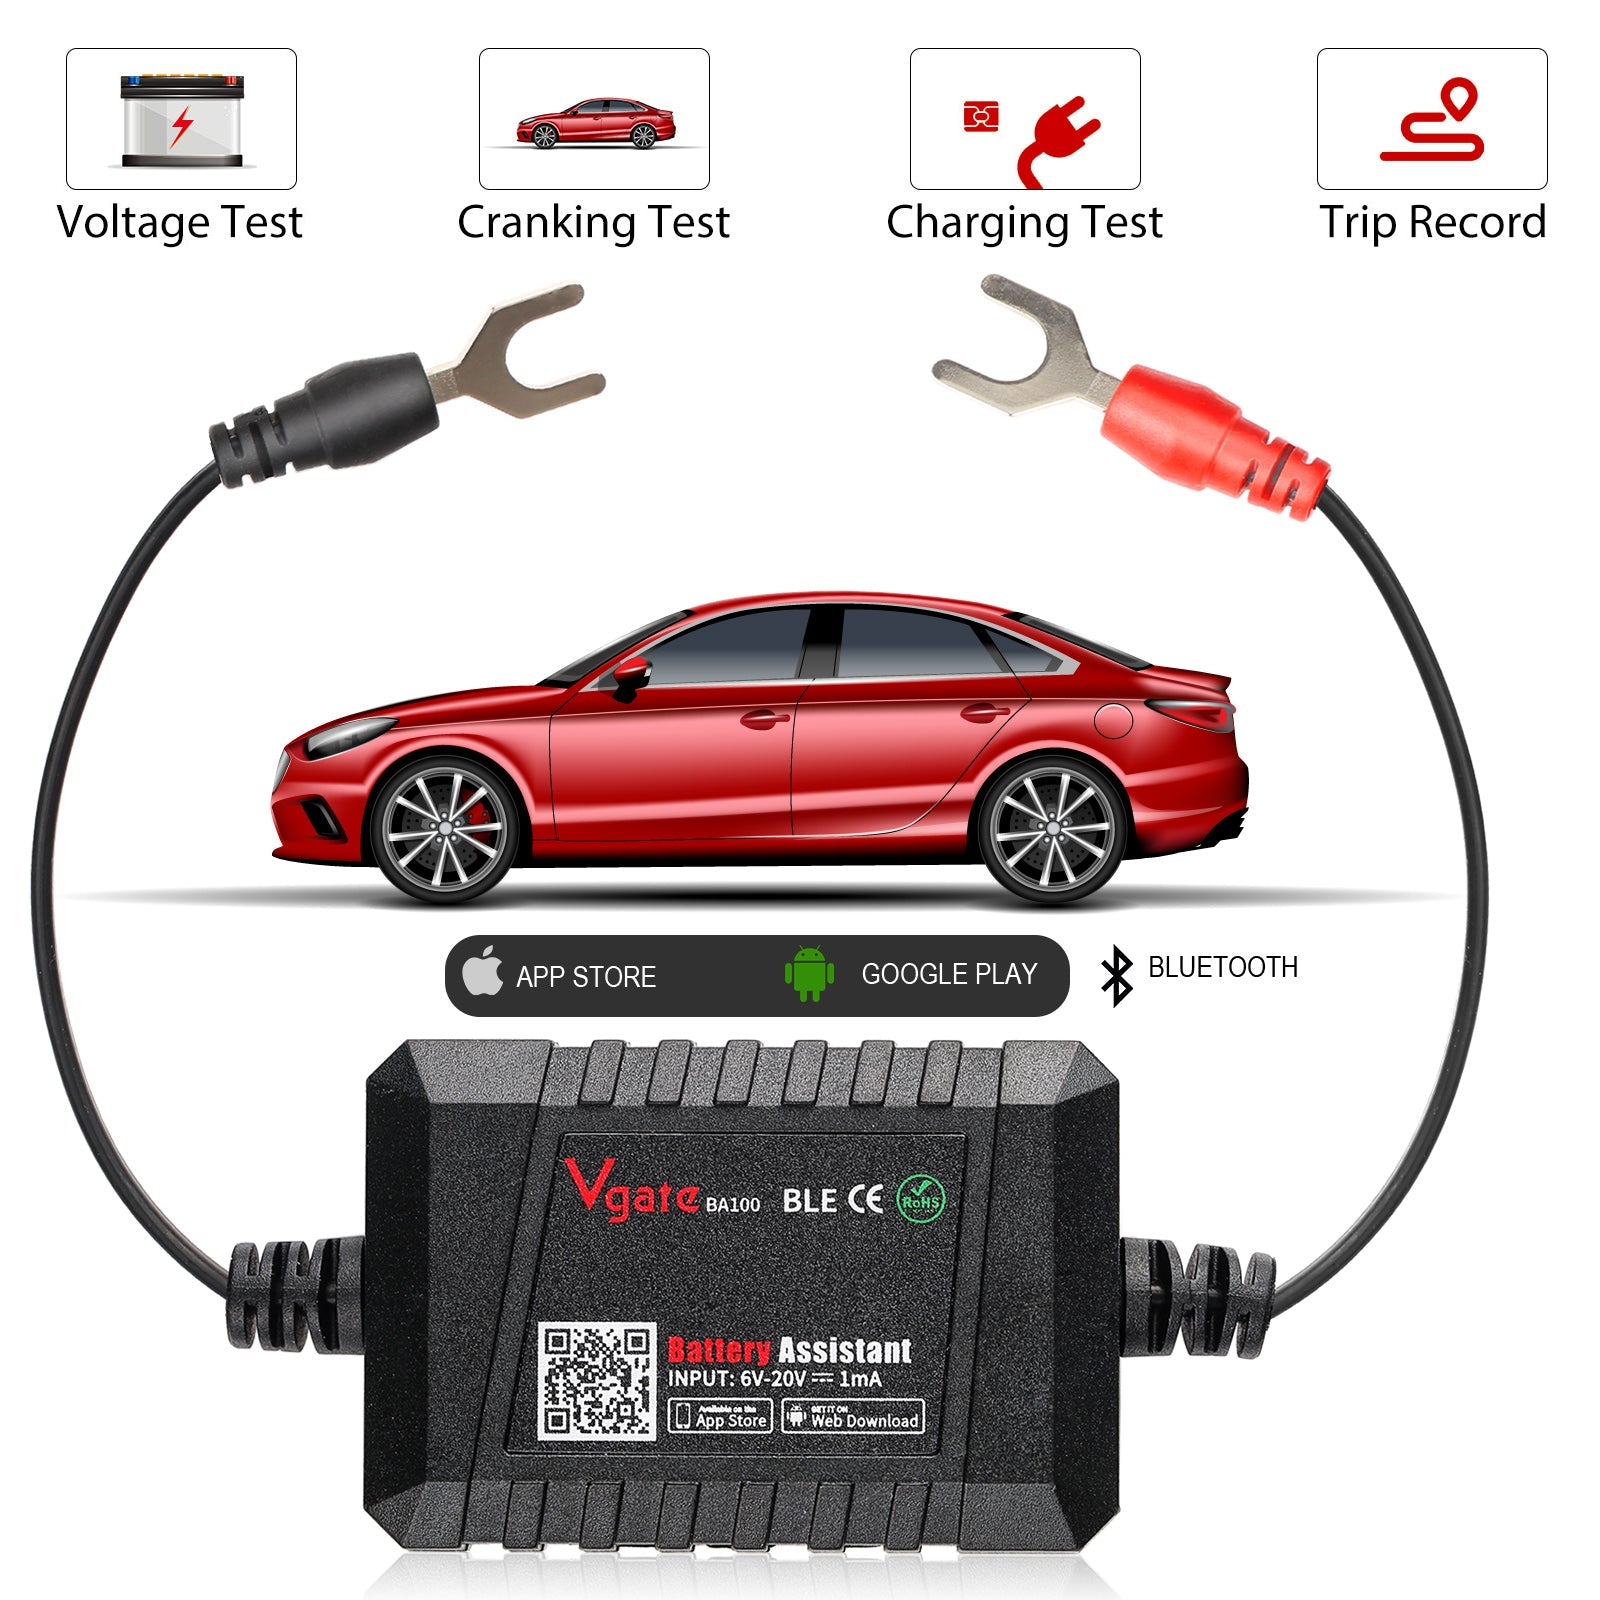 Vgate Battery Assistant Blue Tooth 4.0